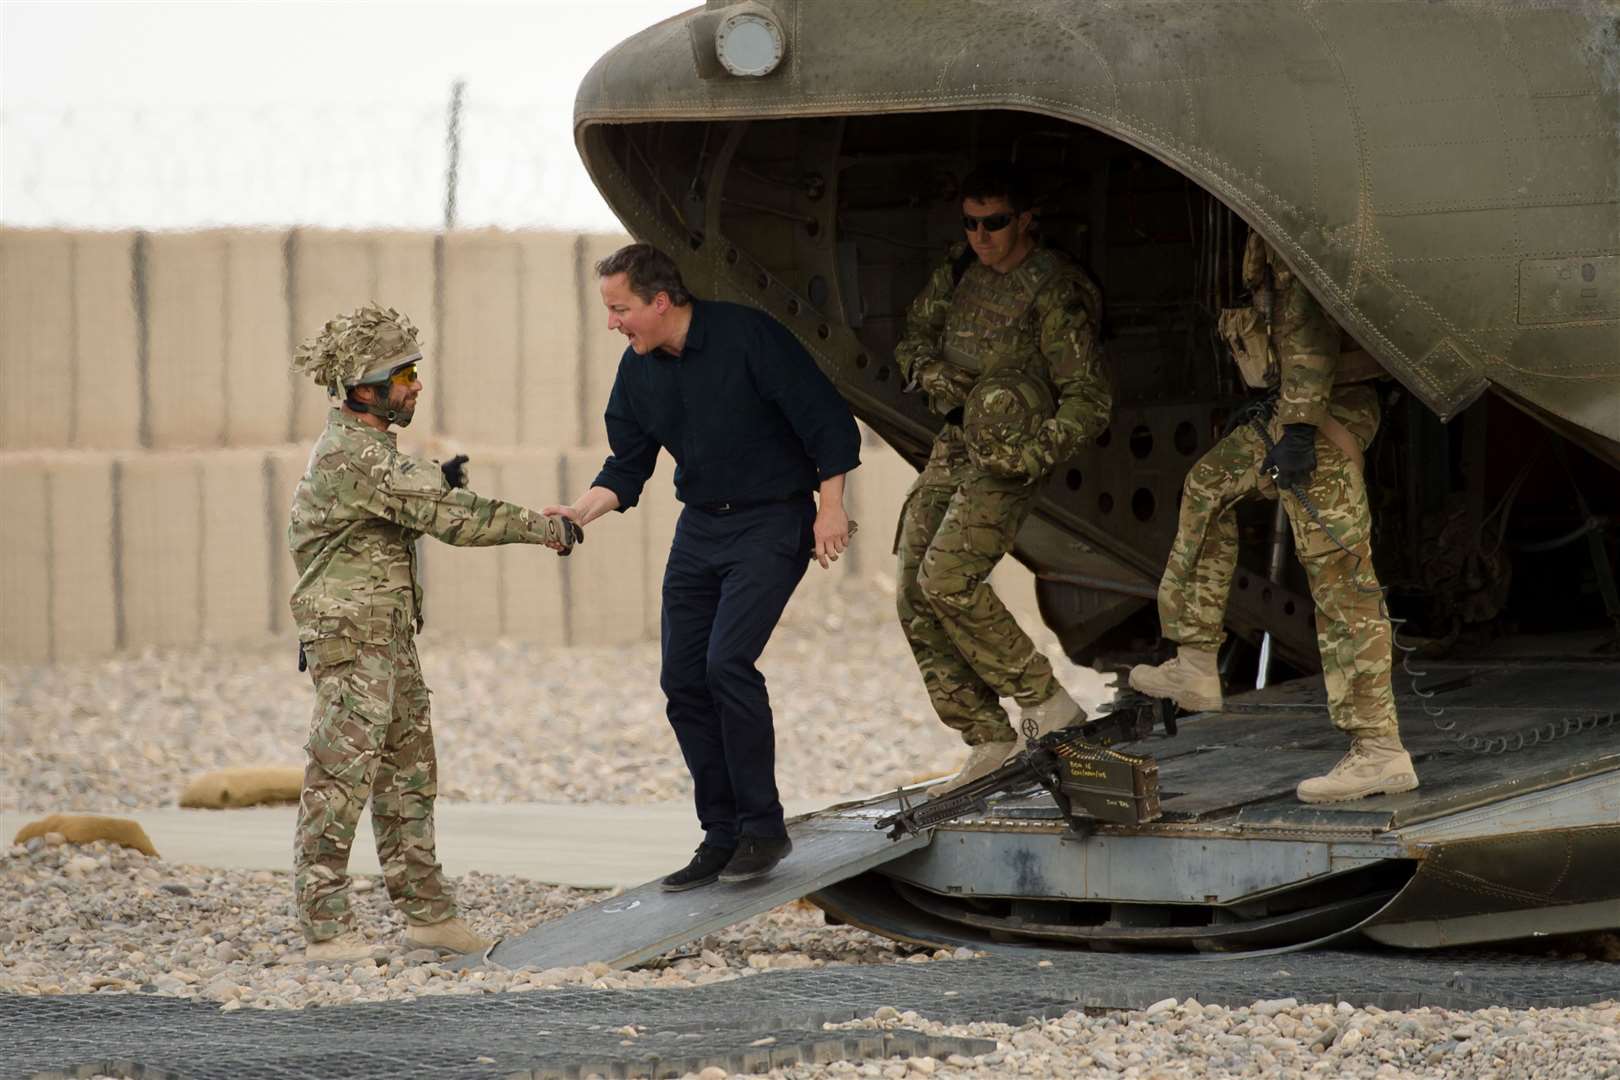 Prime minister David Cameron is greeted as he arrives at Camp Bastion in Helmand province (Leon Neal/PA)